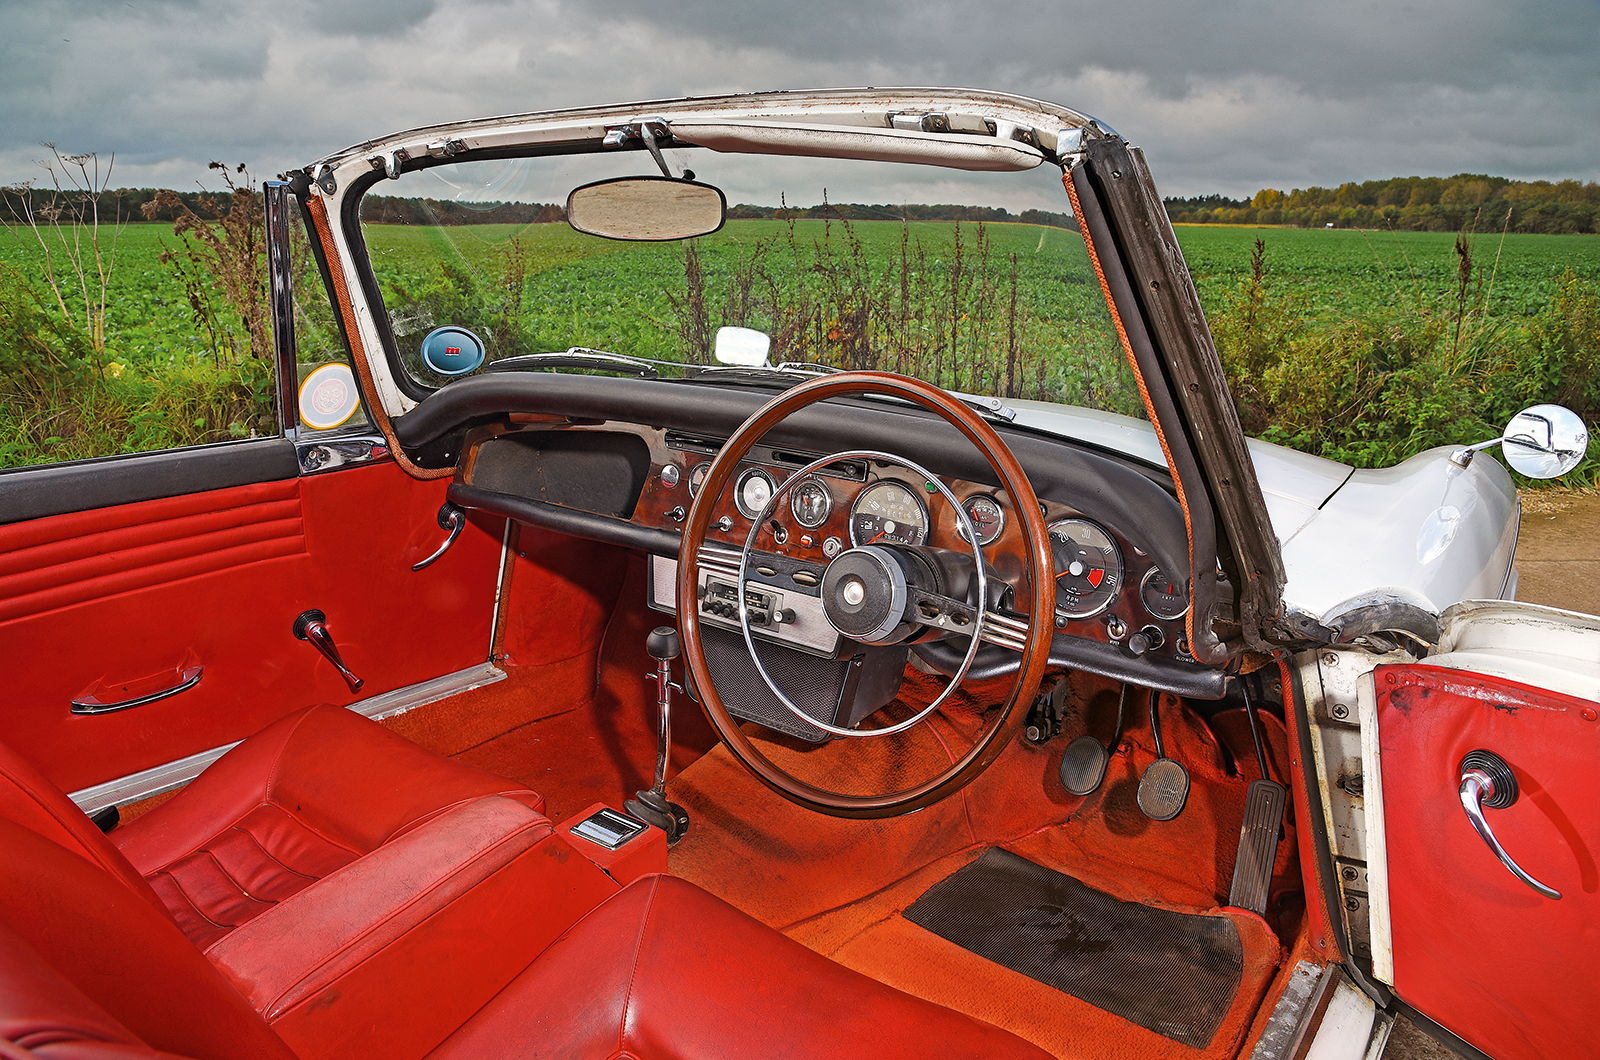 In the cabin of the Sunbeam Tiger with its US-inspired chrome horn ring